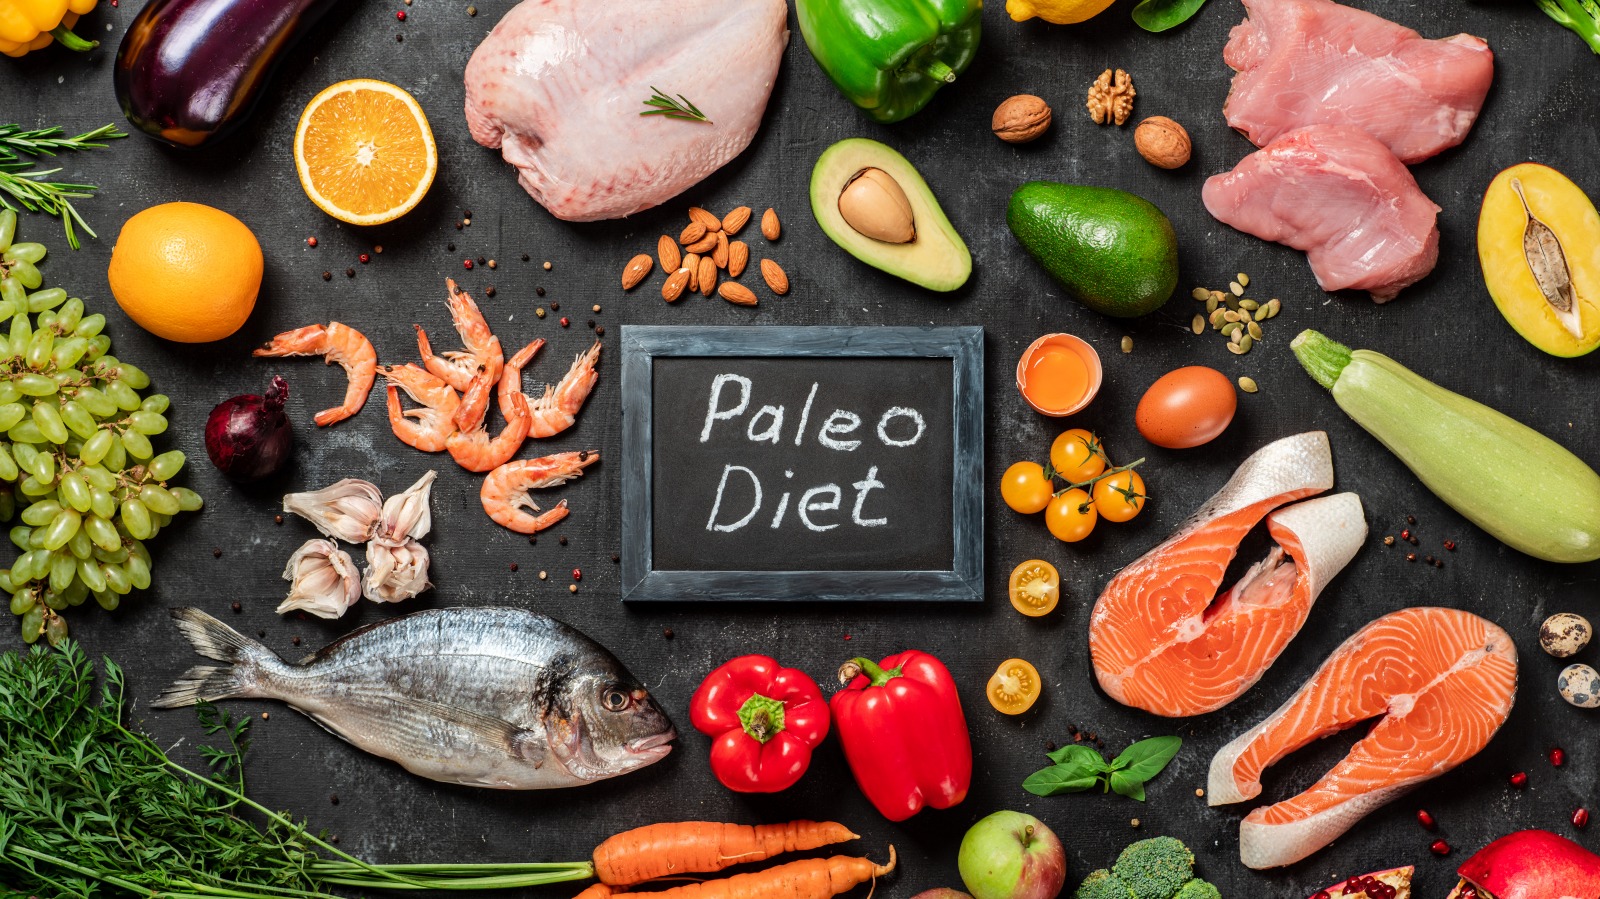 What Is A Paleo Diet? [Infographic]